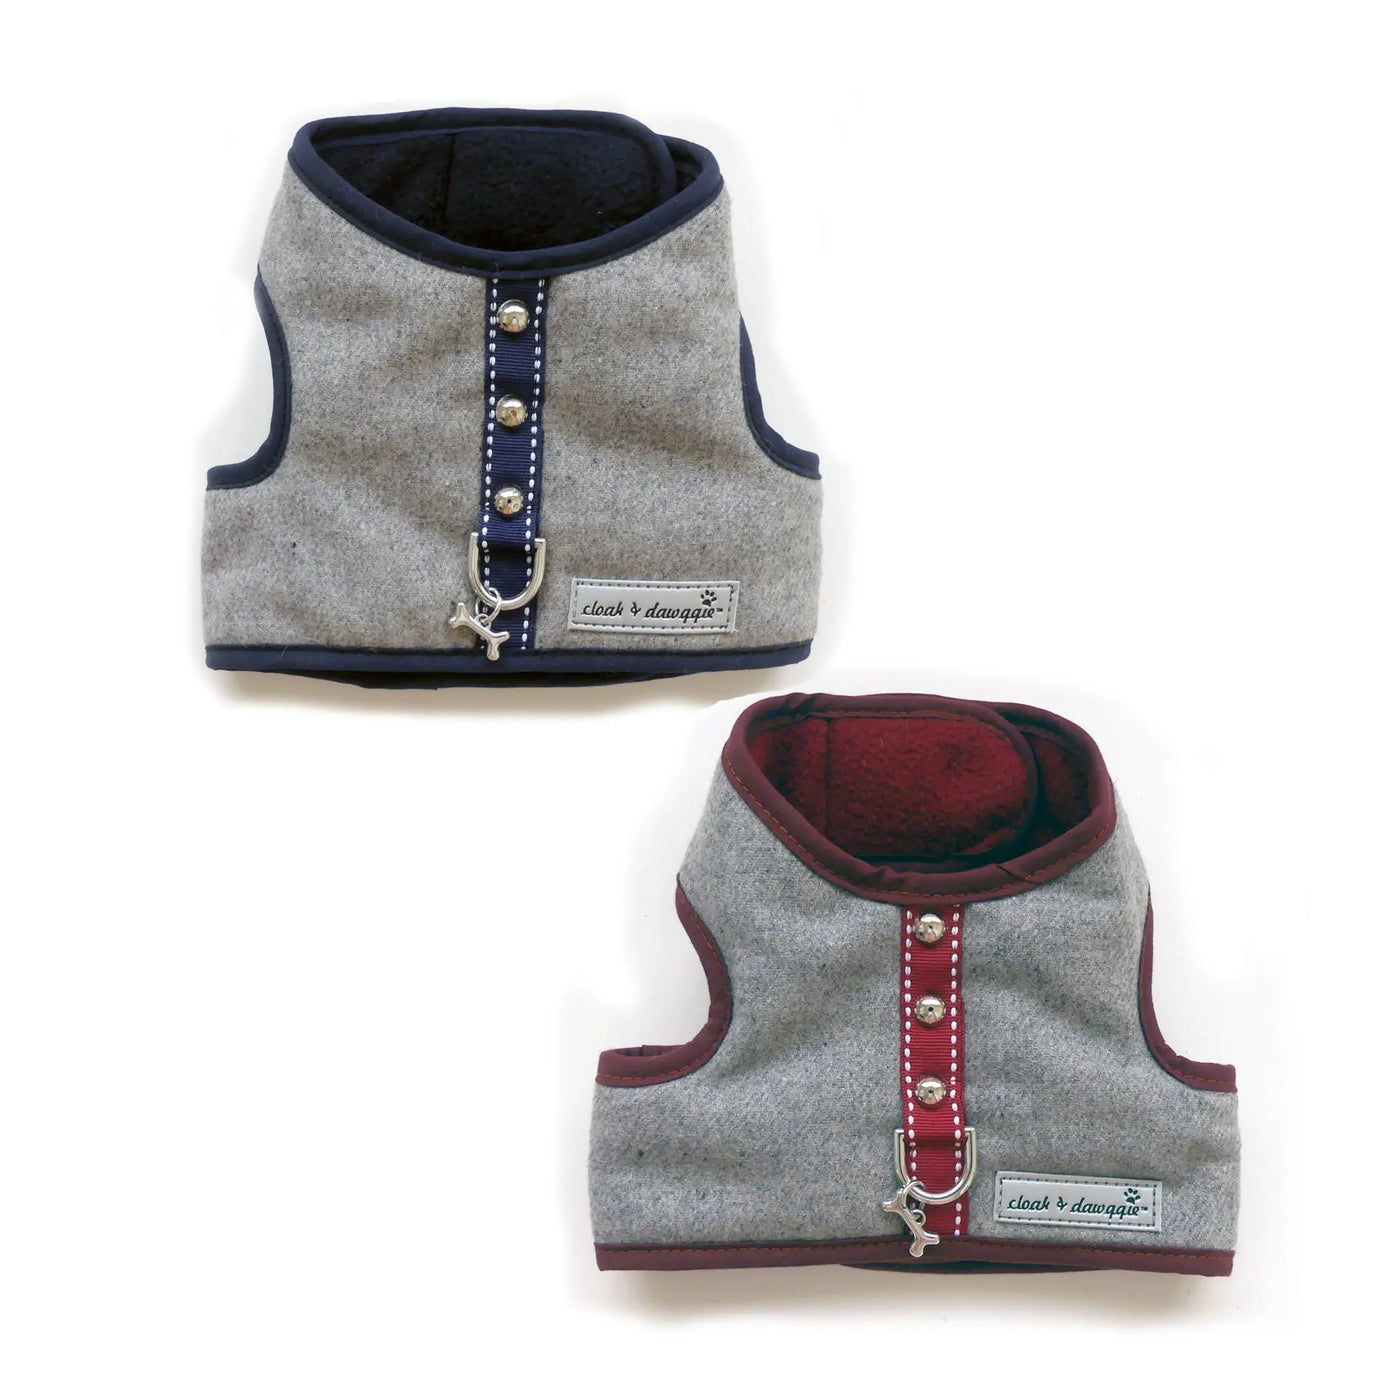 Flannel - The Tiny Dog Harness Vest | 2 LBS to 8 LBS